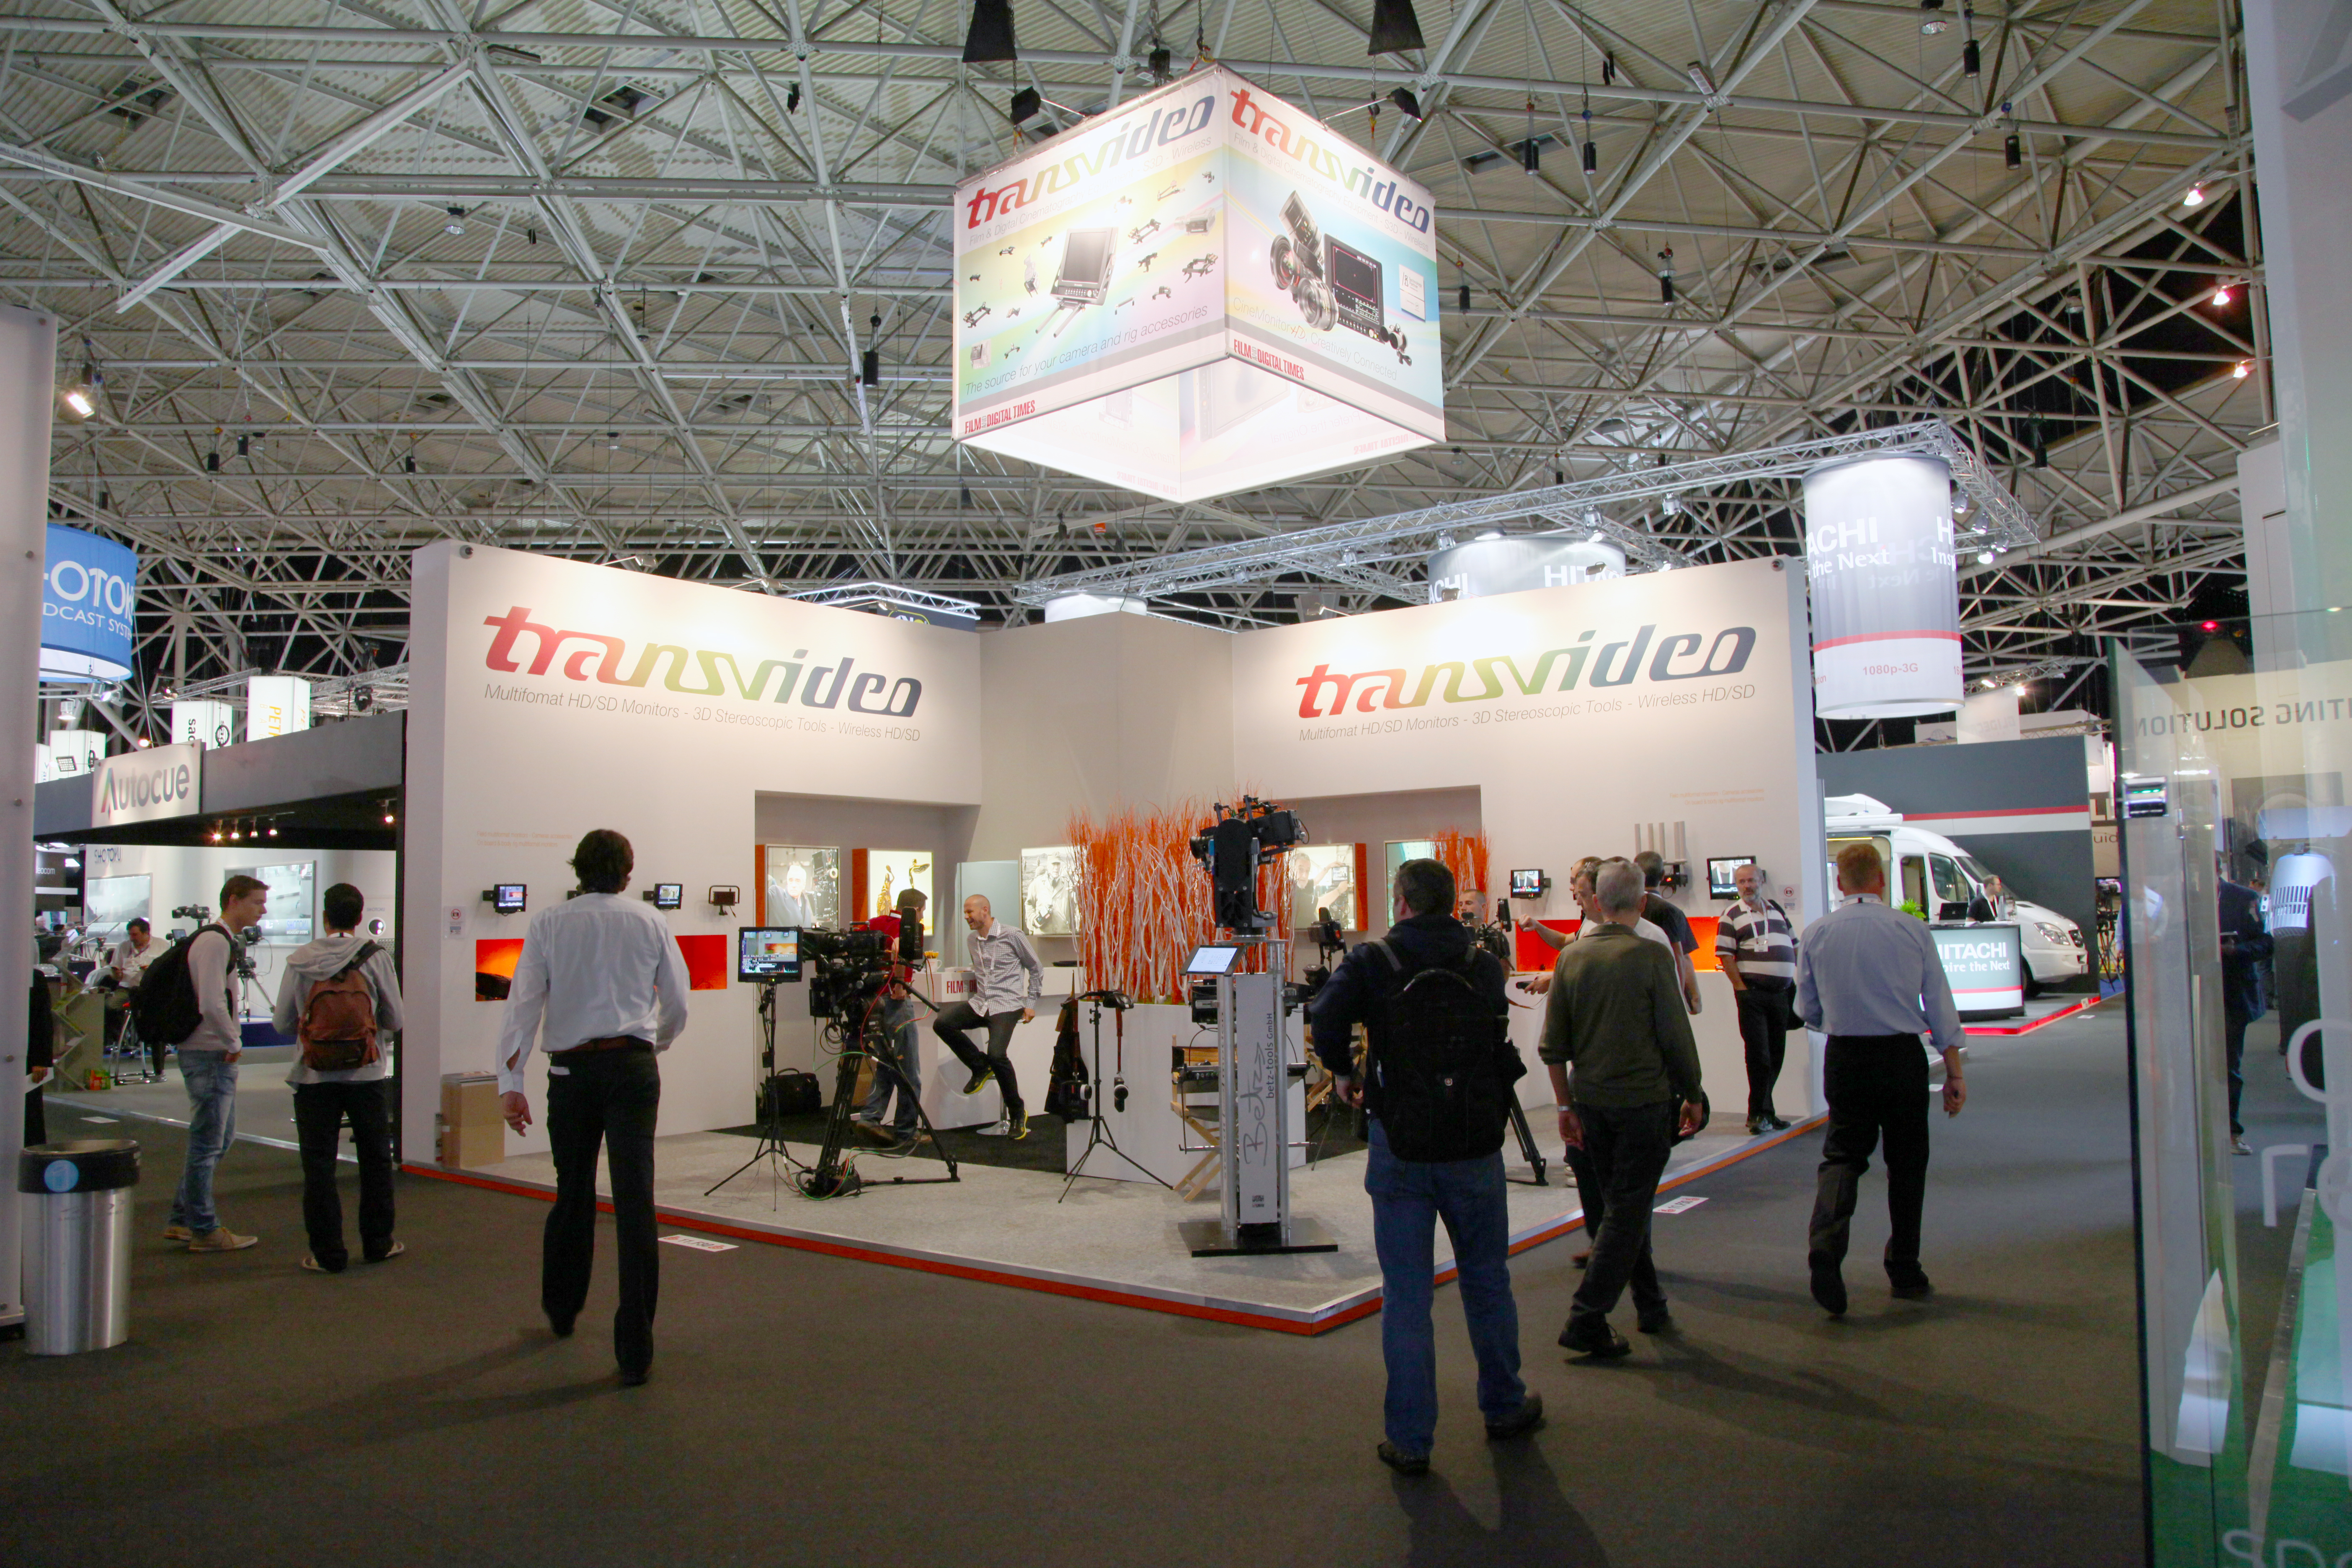 Transvideo's booth at IBC2012